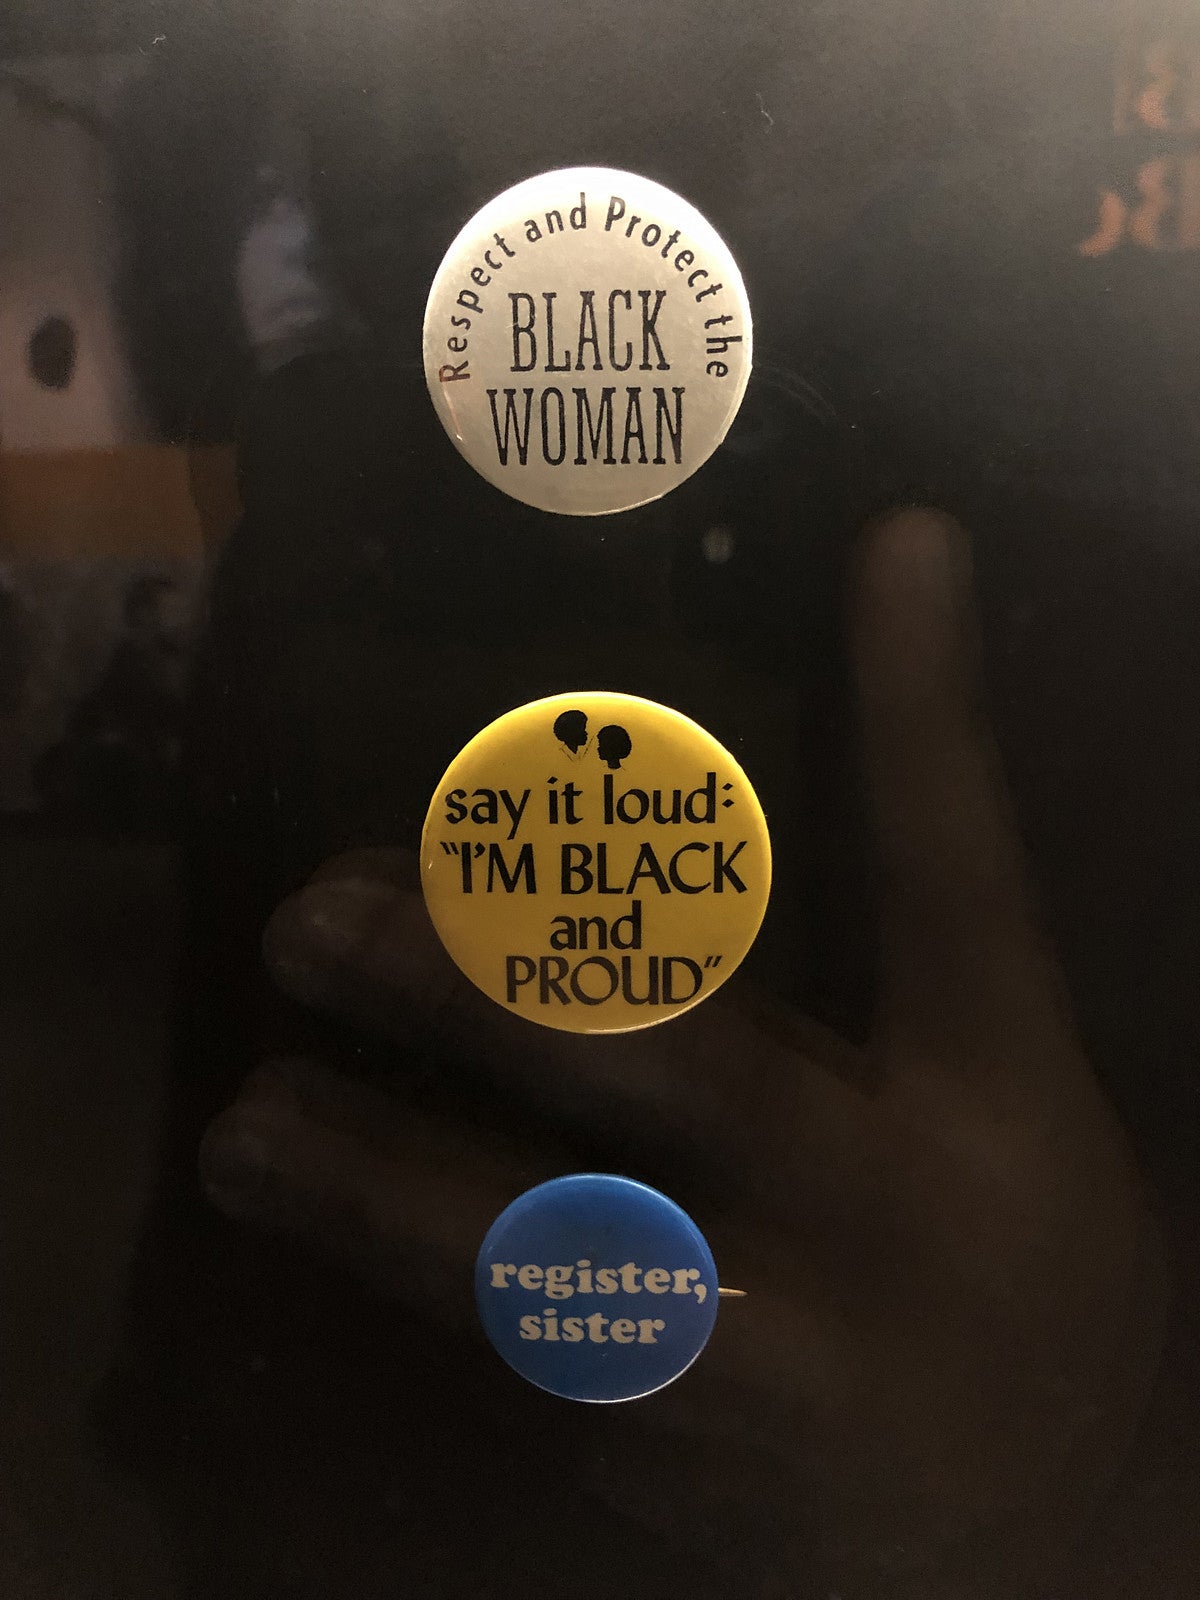 Buttons on exhibit at the at the Smithsonian's National Museum of African American History and Culture